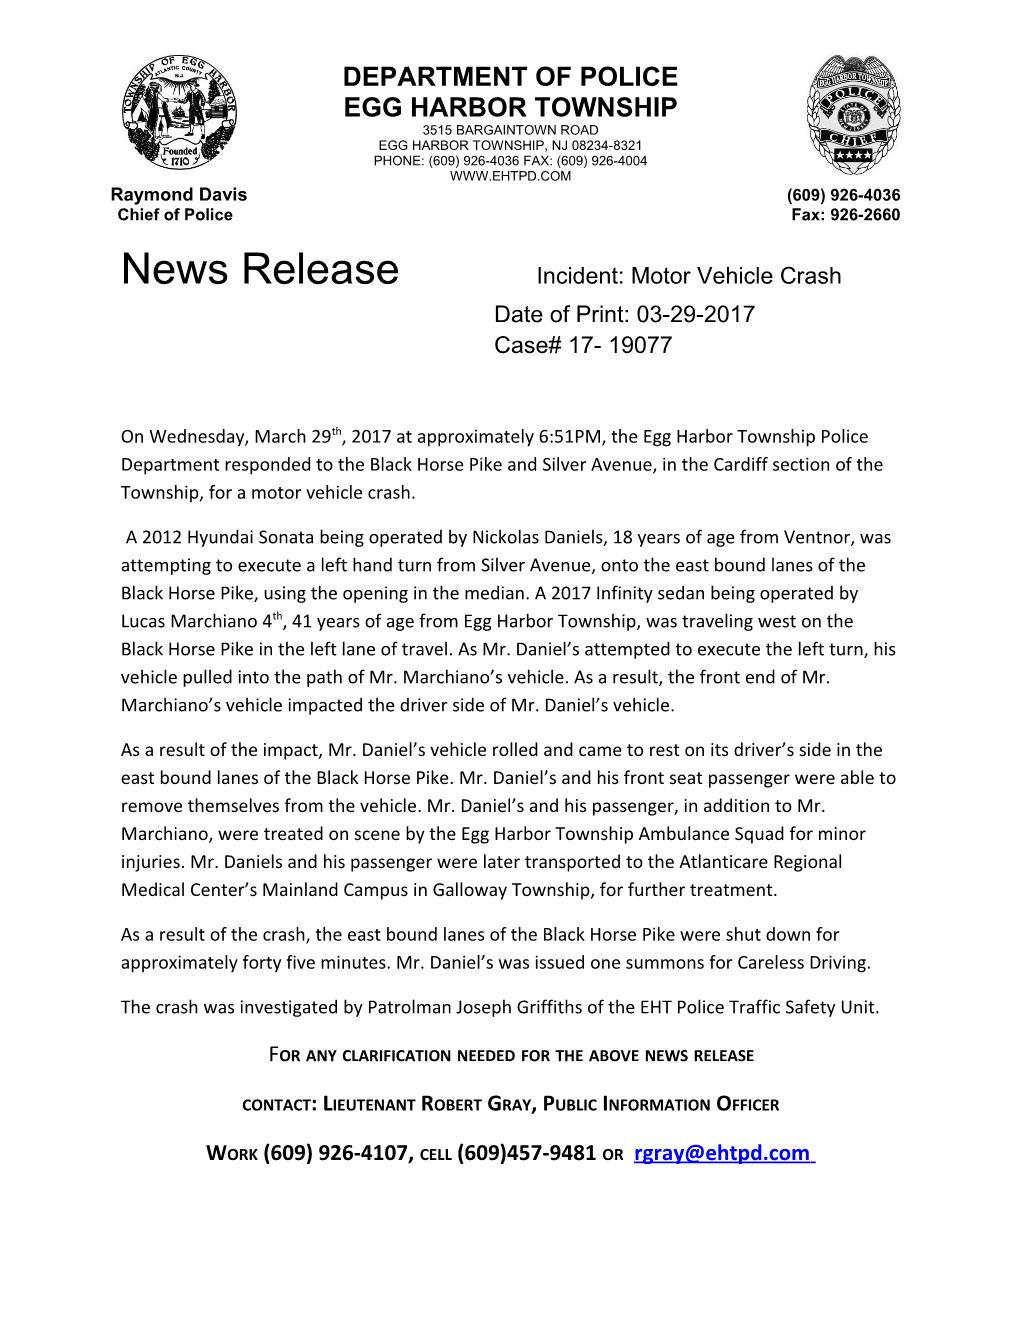 News Release Incident: Robbery Update s5